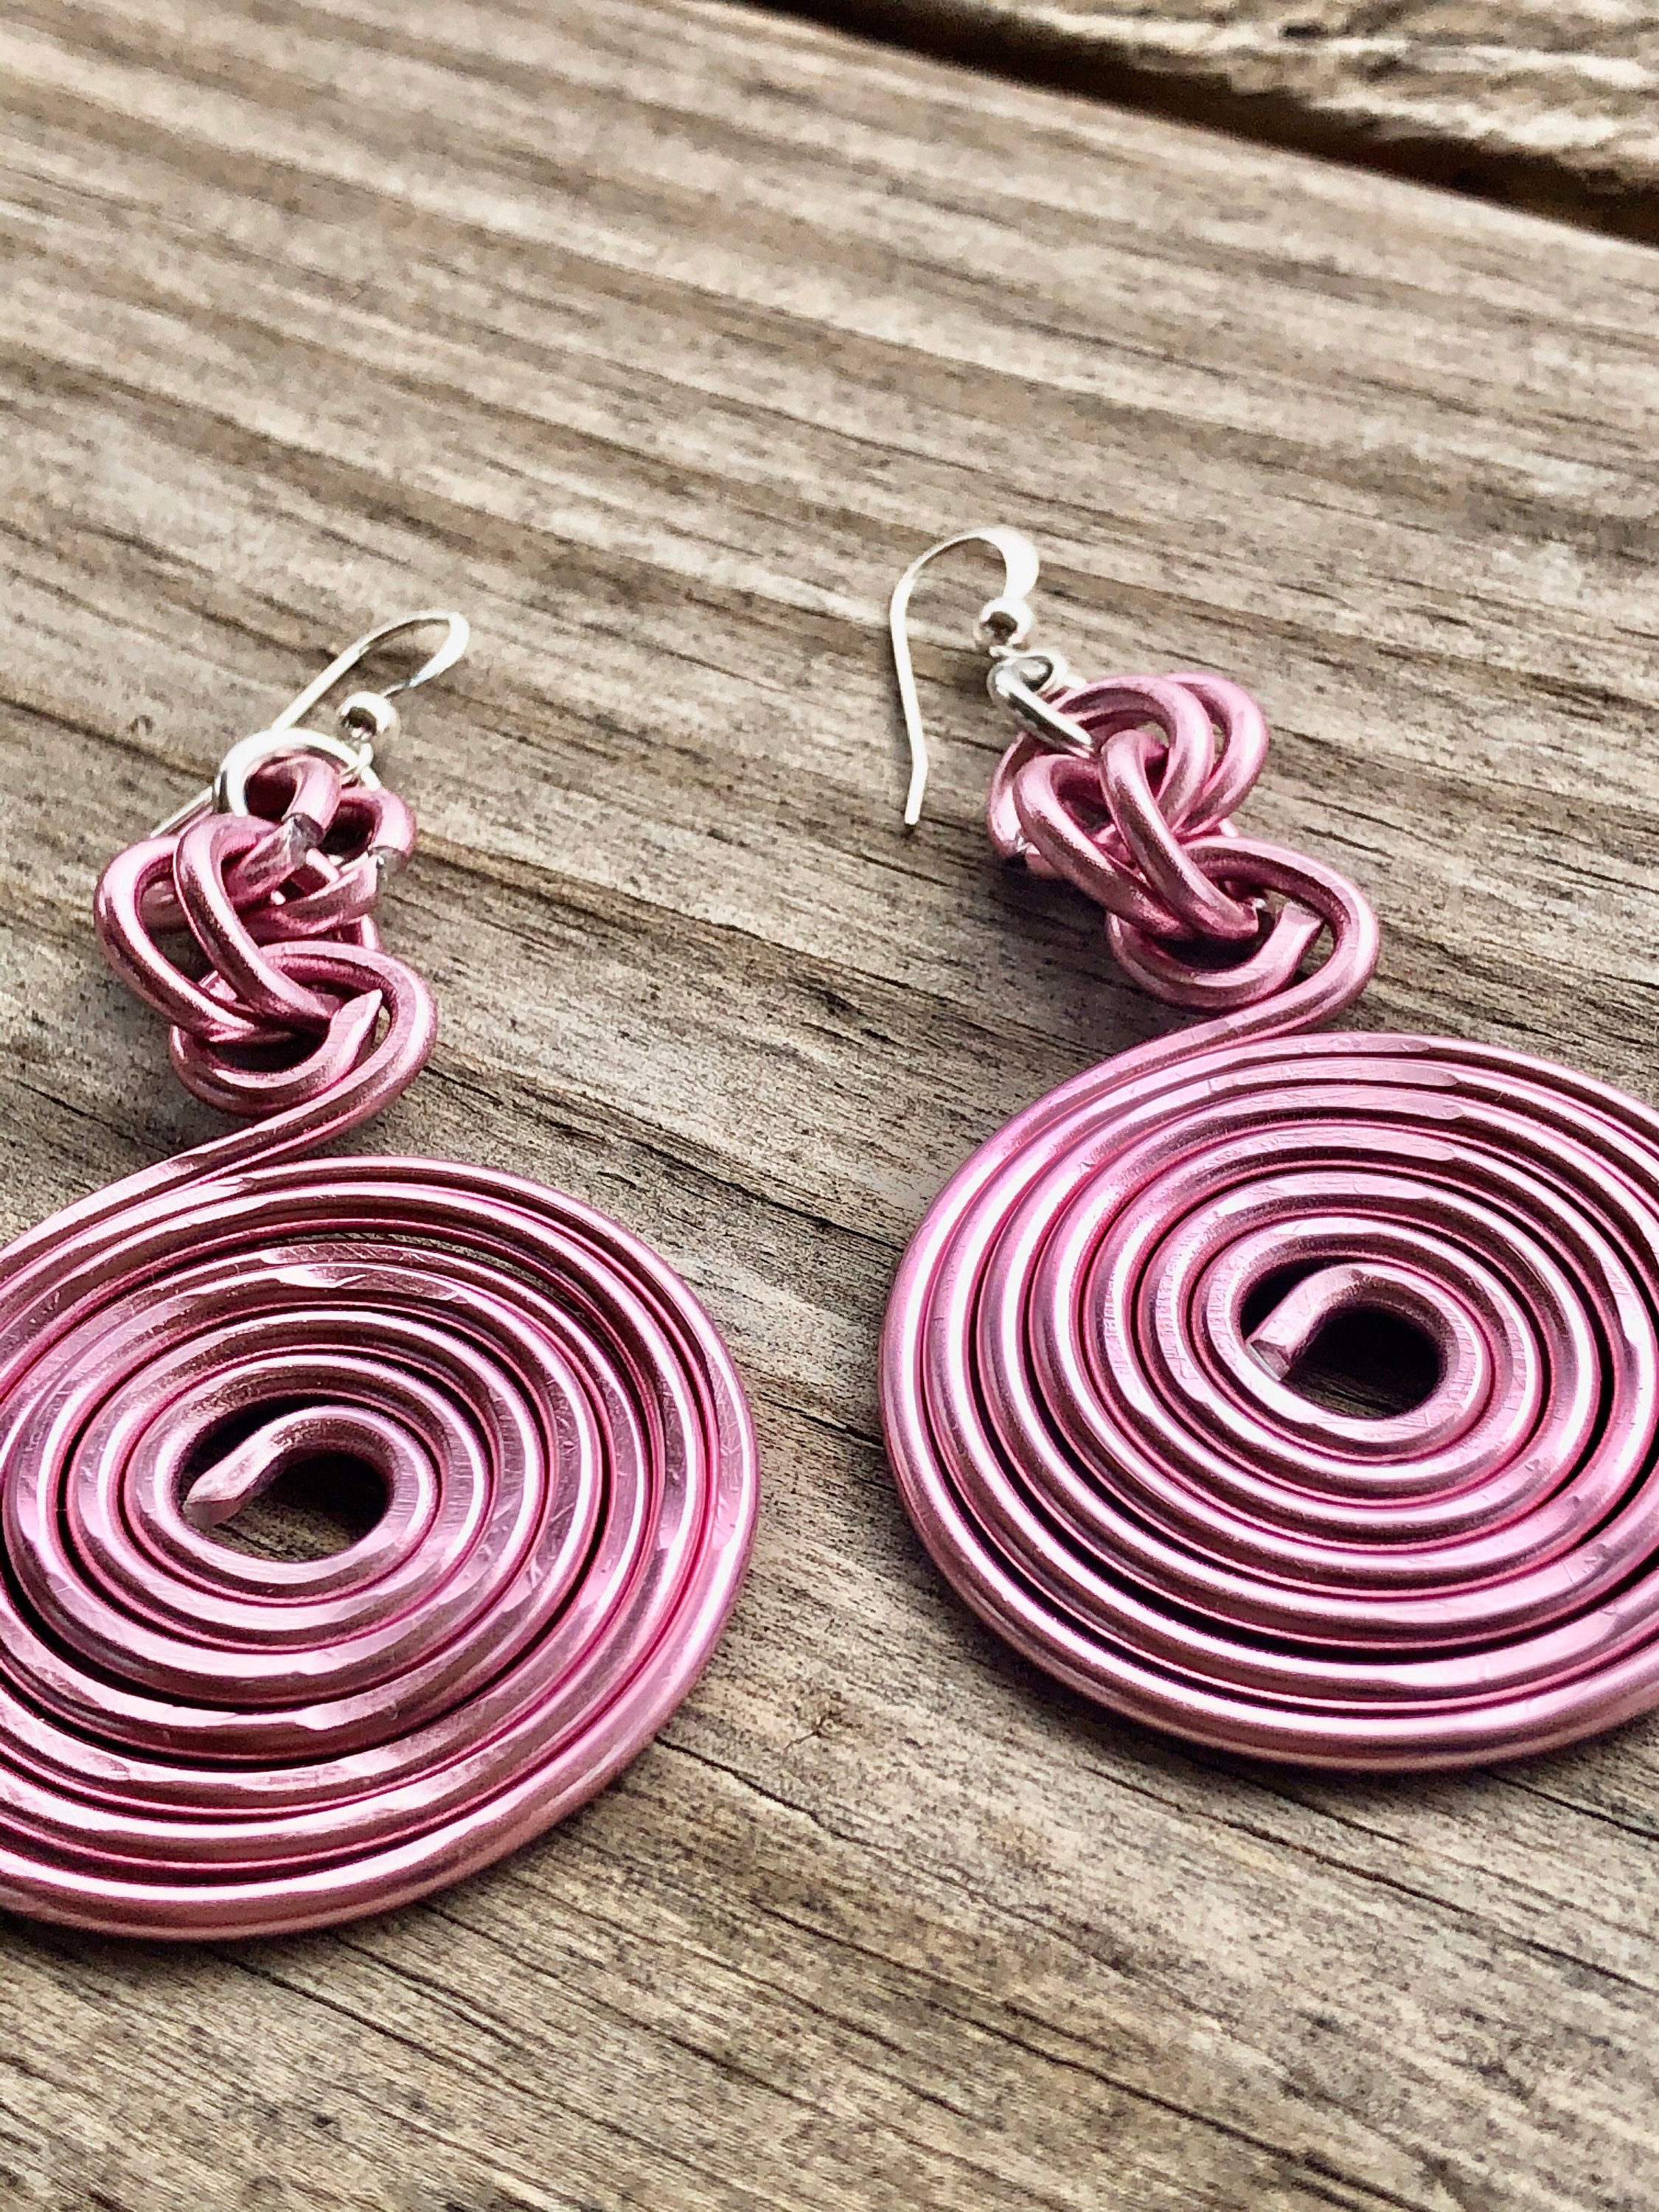 Medium Round Pink Hammered Earrings with Sterling Silver Ear Wire